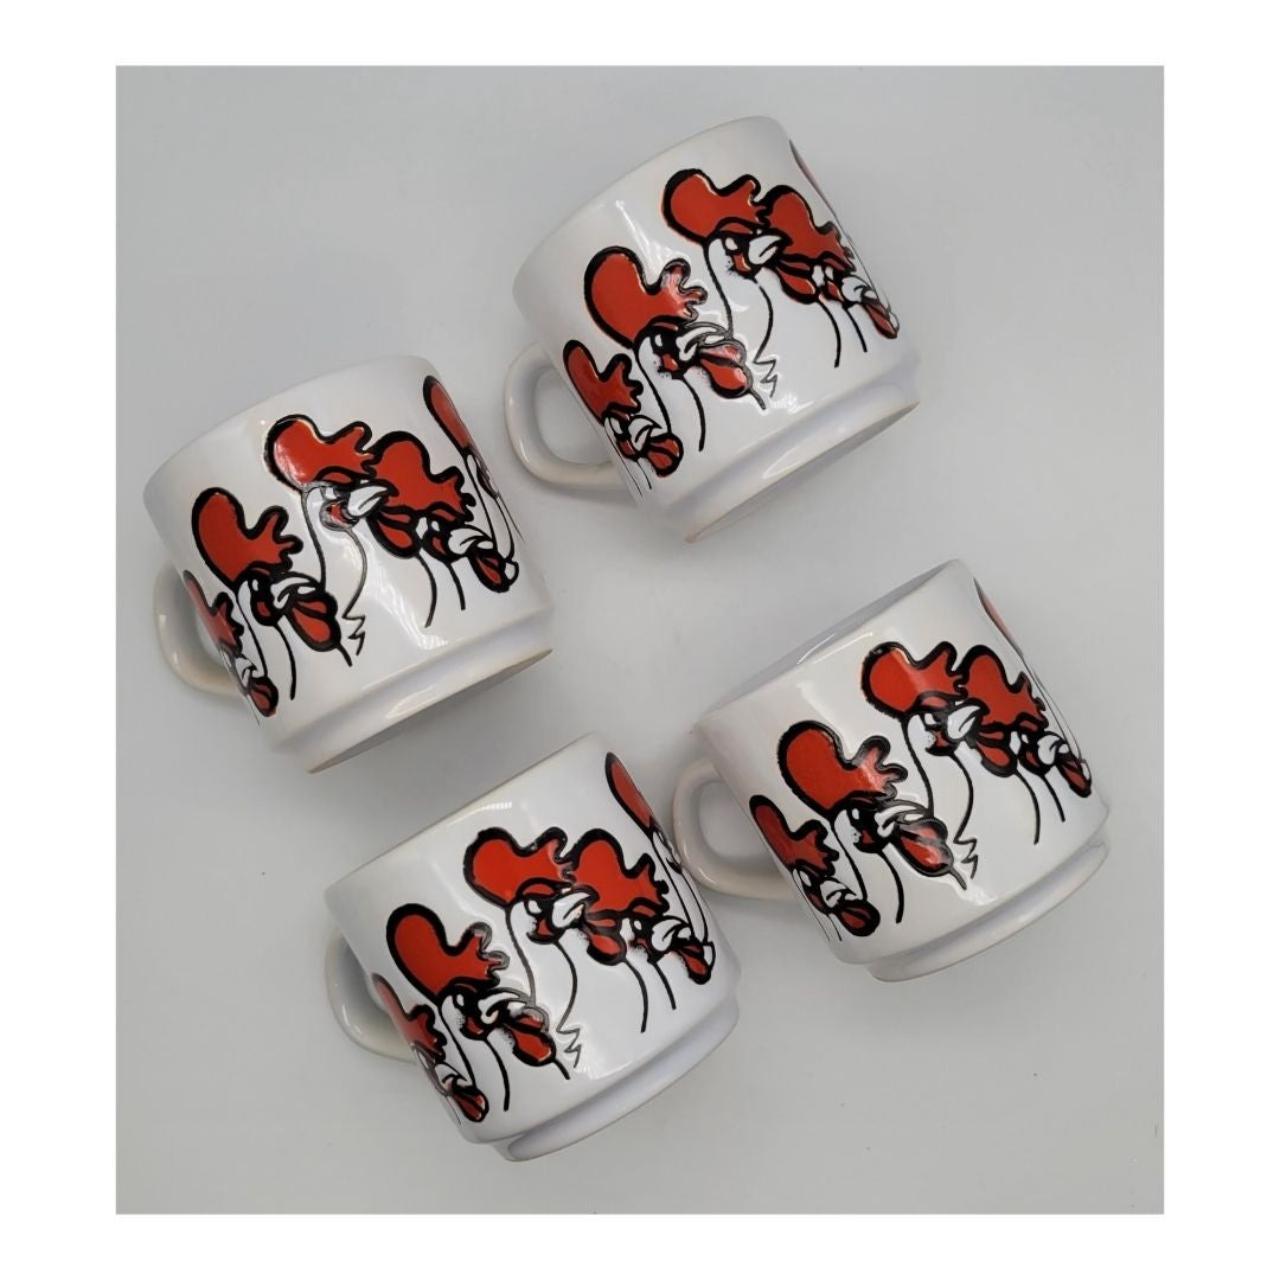 Product Image 4 - Vintage 1970's Stackable Rooster Mugs